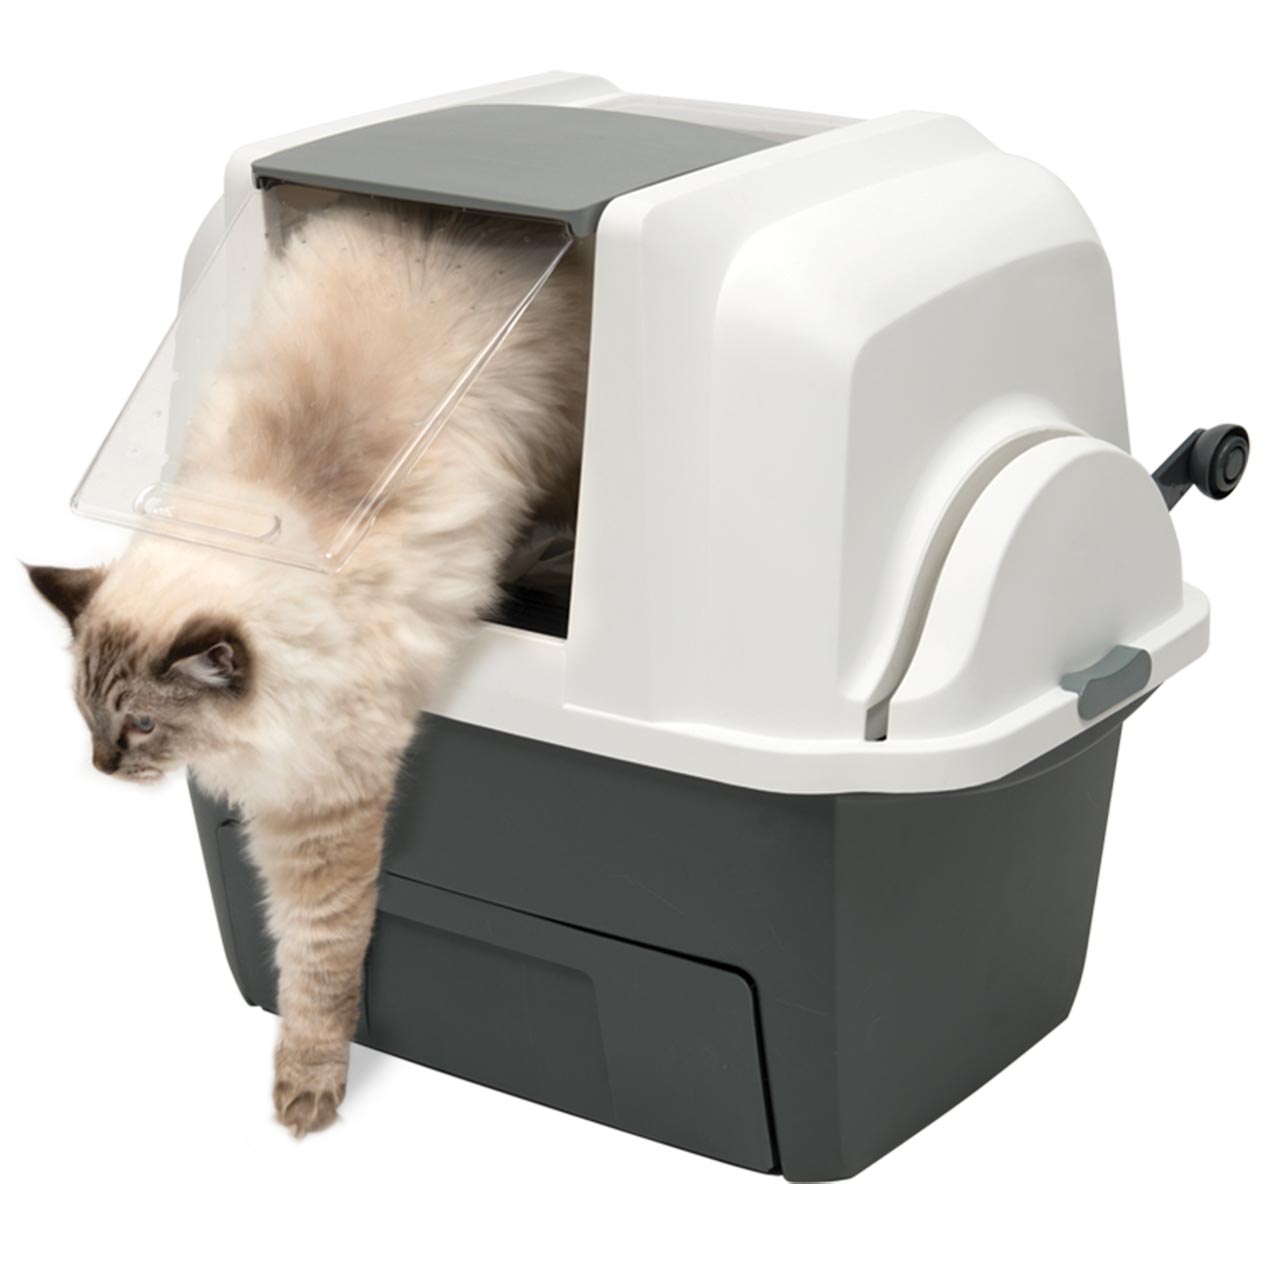 Litter box with paw-friendly removable swinging door and hood for privacy